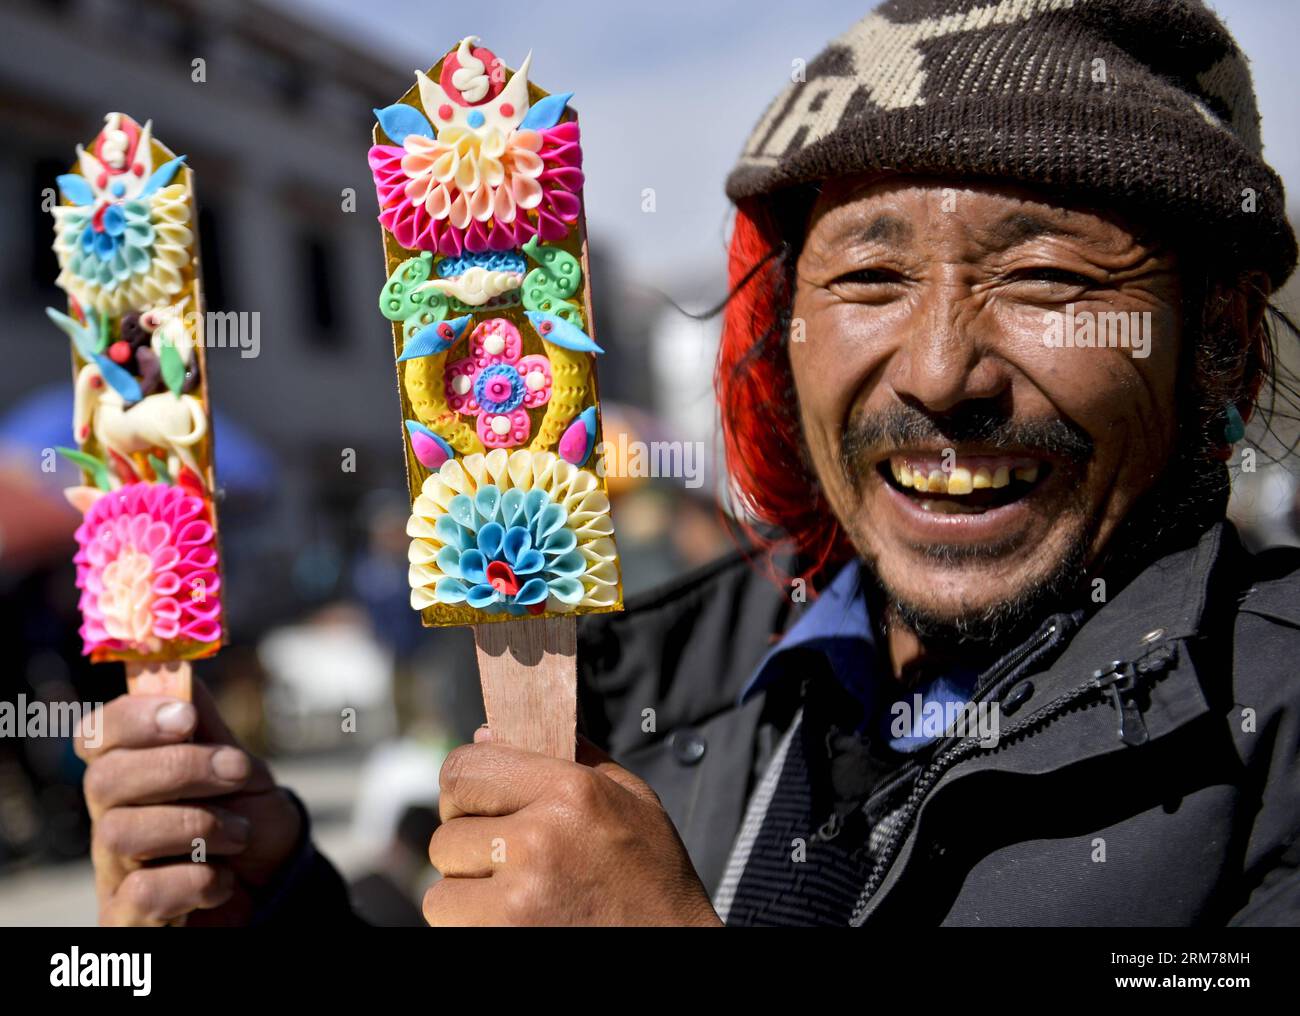 (140219) -- LHASA, Feb. 19, 2014 (Xinhua) -- Zhaxi Logyai from Nyemo County sells butter sculptures before the coming Tibetan losar or the Tibetan New Year at a bazaar in Lhasa, capital of southwest China s Tibet Autonomous Region, Feb. 19, 2014. People of the Tibetan ethnic group will embrace the Wood Horse Losar on March 2. (Xinhua/Purbu Zhaxi) (lfj) CHINA-LHASA-LOSAR-BAZAAR (CN) PUBLICATIONxNOTxINxCHN   Lhasa Feb 19 2014 XINHUA Zhaxi Logyai from  County sells Butter Sculptures Before The Coming Tibetan Losar or The Tibetan New Year AT a Bazaar in Lhasa Capital of Southwest China S Tibet Aut Stock Photo